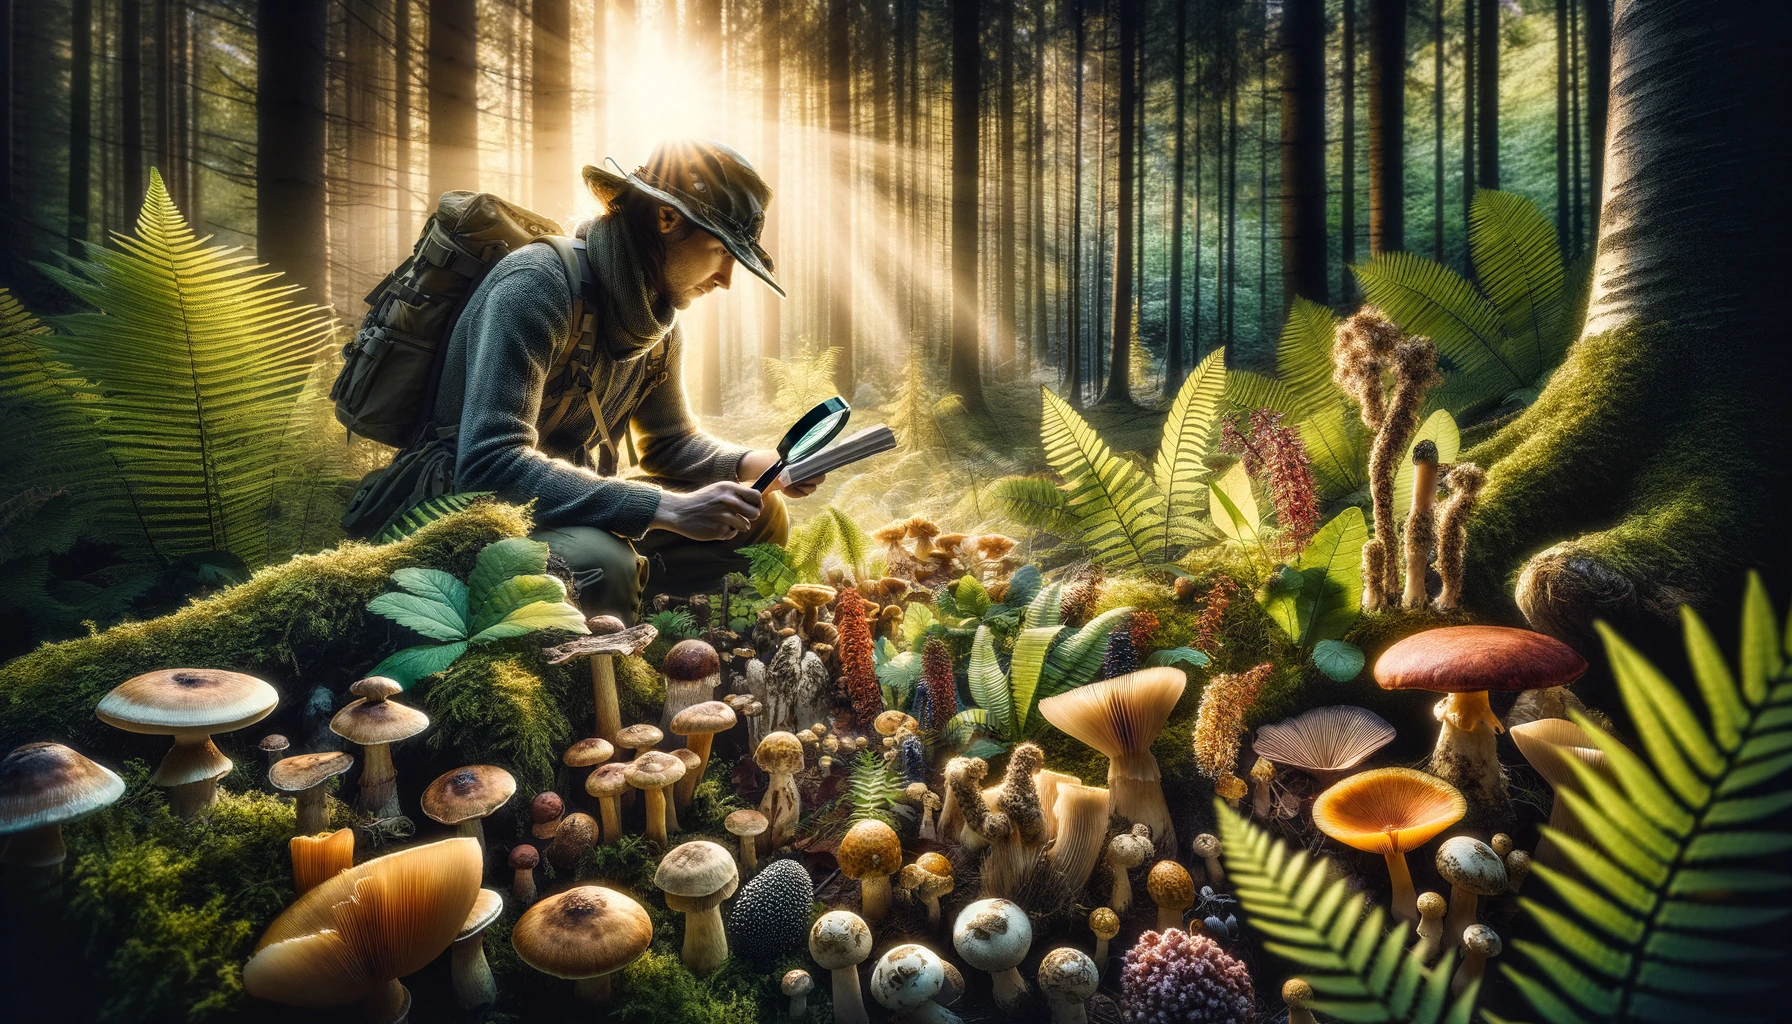 Expert forager identifying edible wild plants and mushrooms in a diverse woodland, equipped with a magnifying glass and a field guide, amidst a rich array of vibrant flora and fungi under the sunlight filtering through the trees, capturing the essence of wilderness survival and the joy of discovery